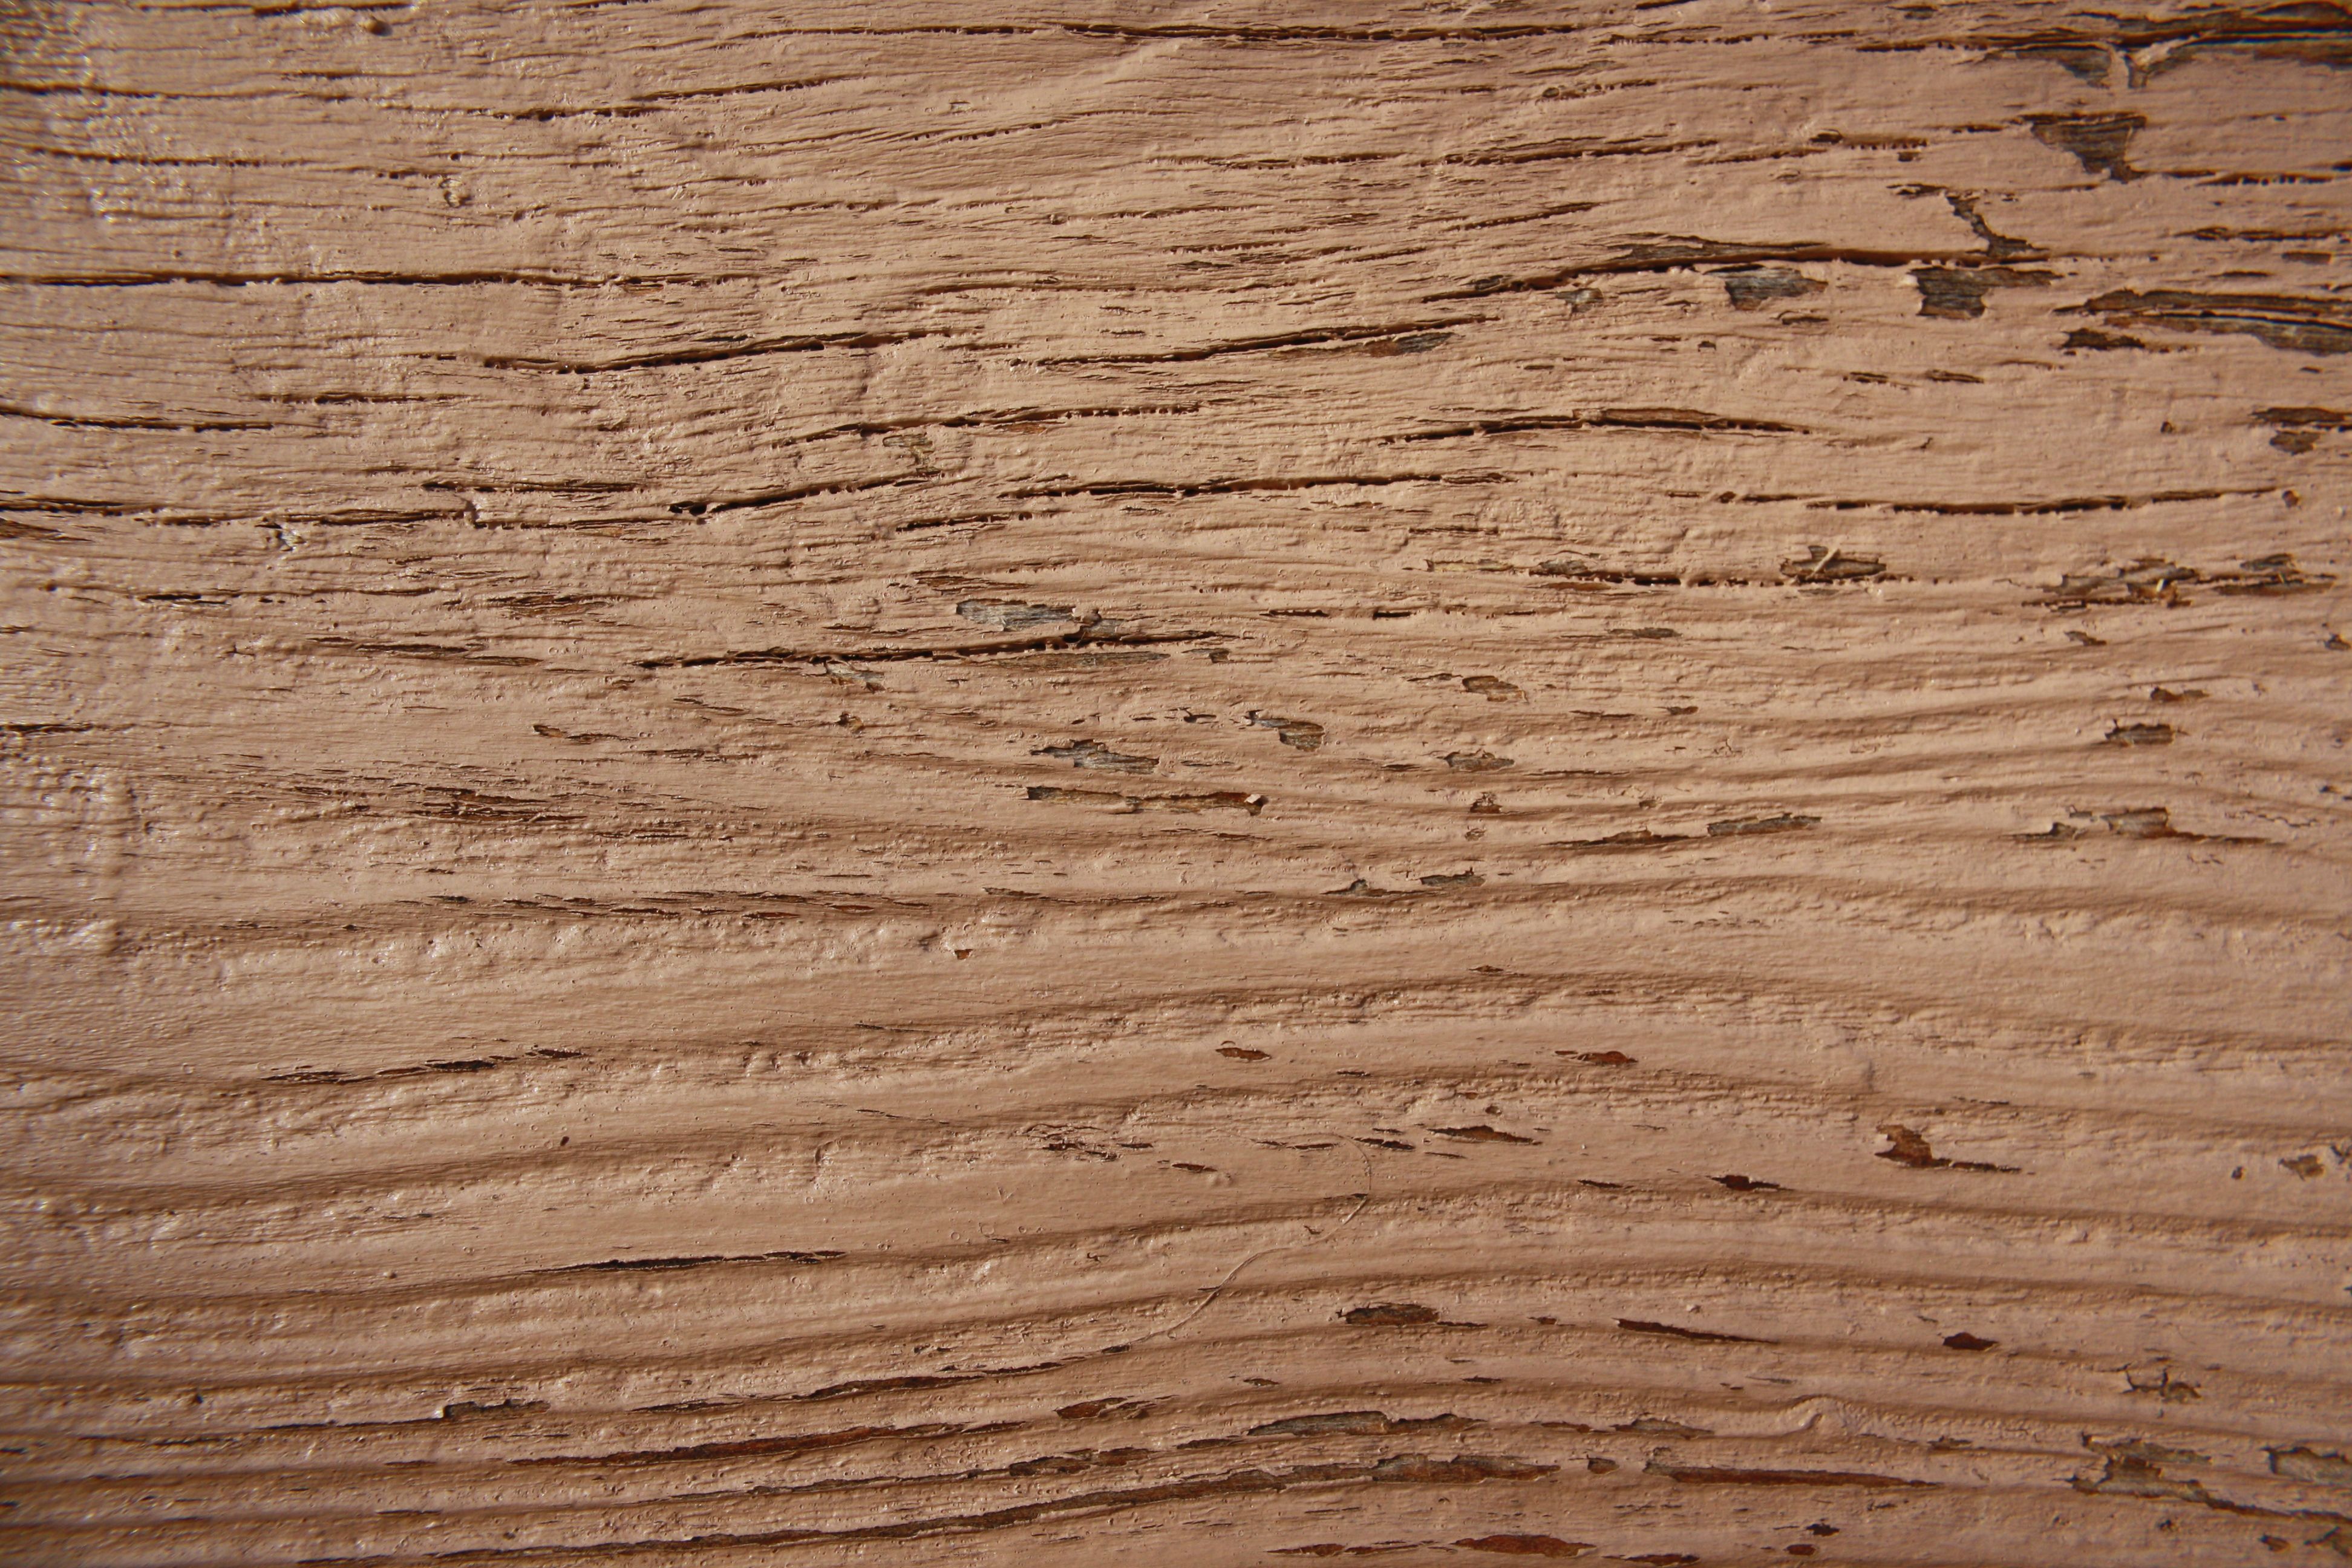 Wood Grain Closeup Texture with Brown Peeling Paint Picture. Free